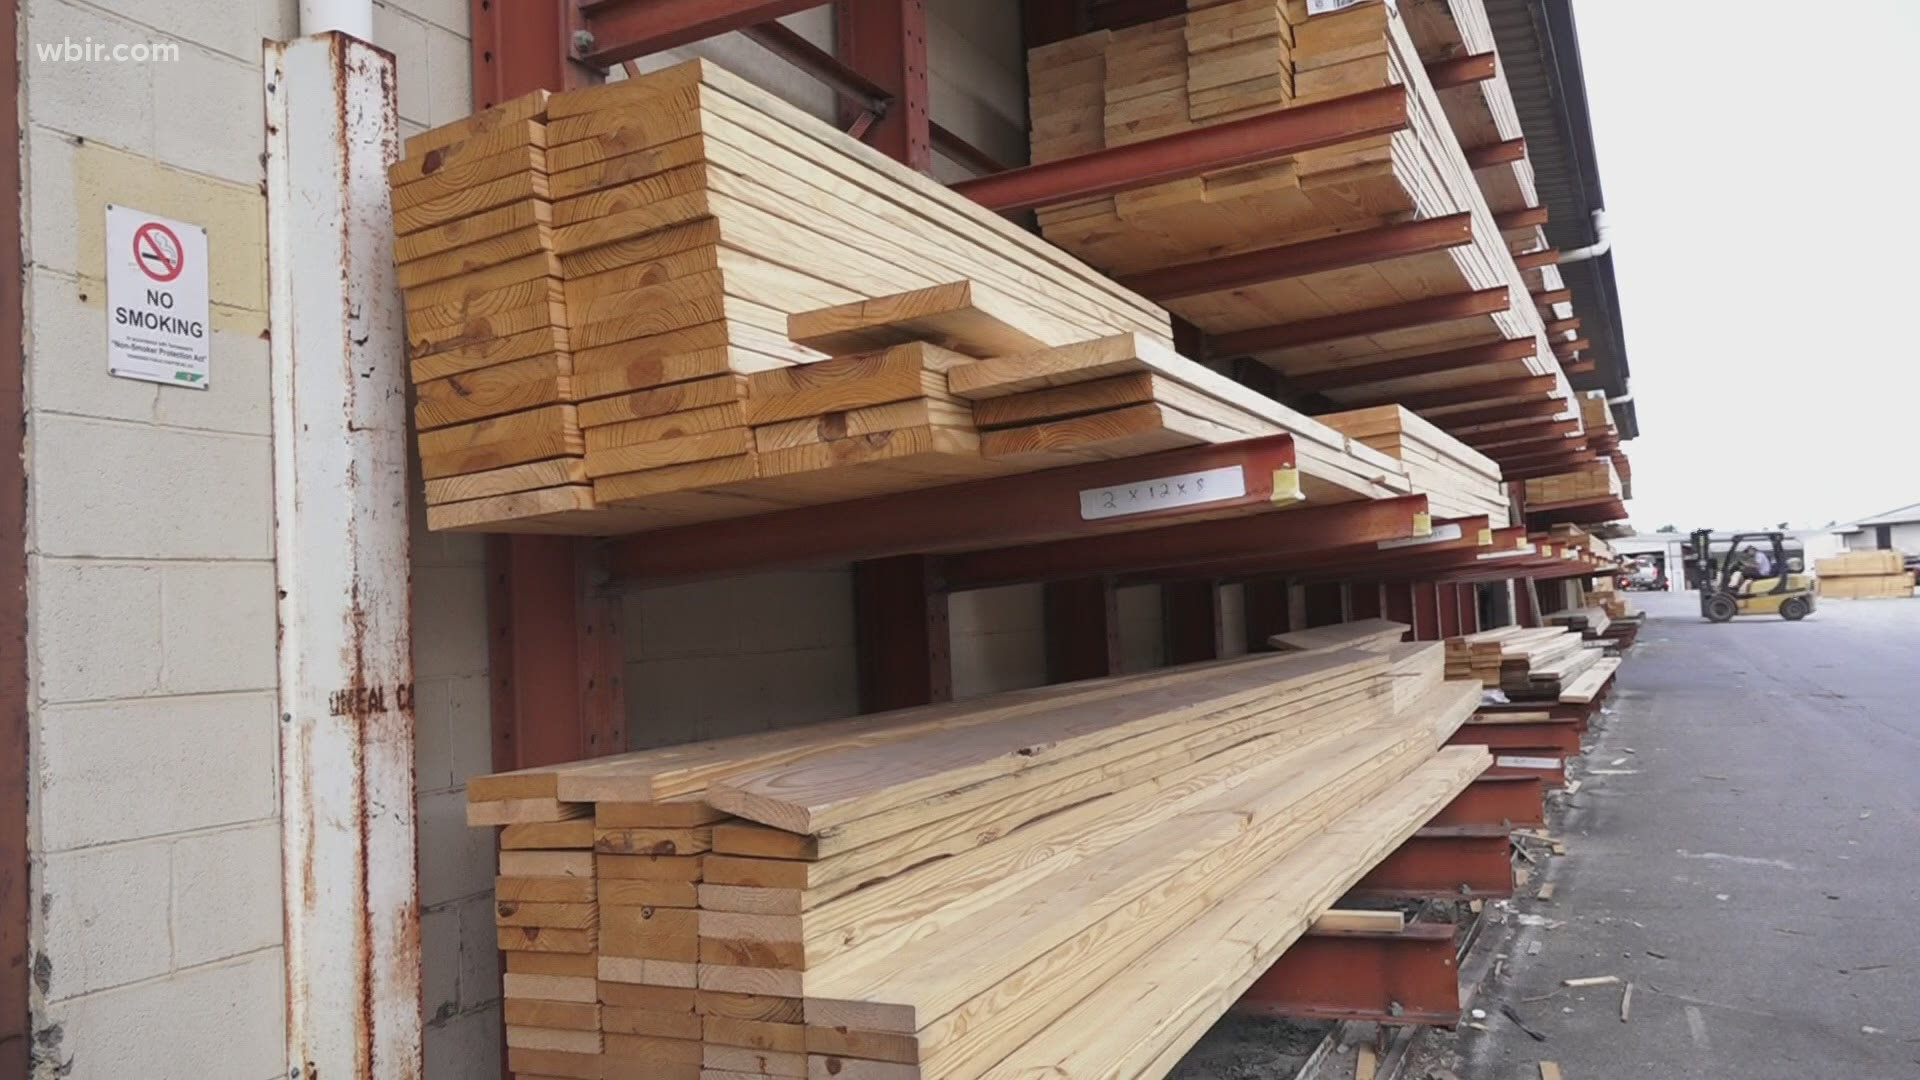 Lumber companies can't get their shipments, and builders are putting some projects on hold.